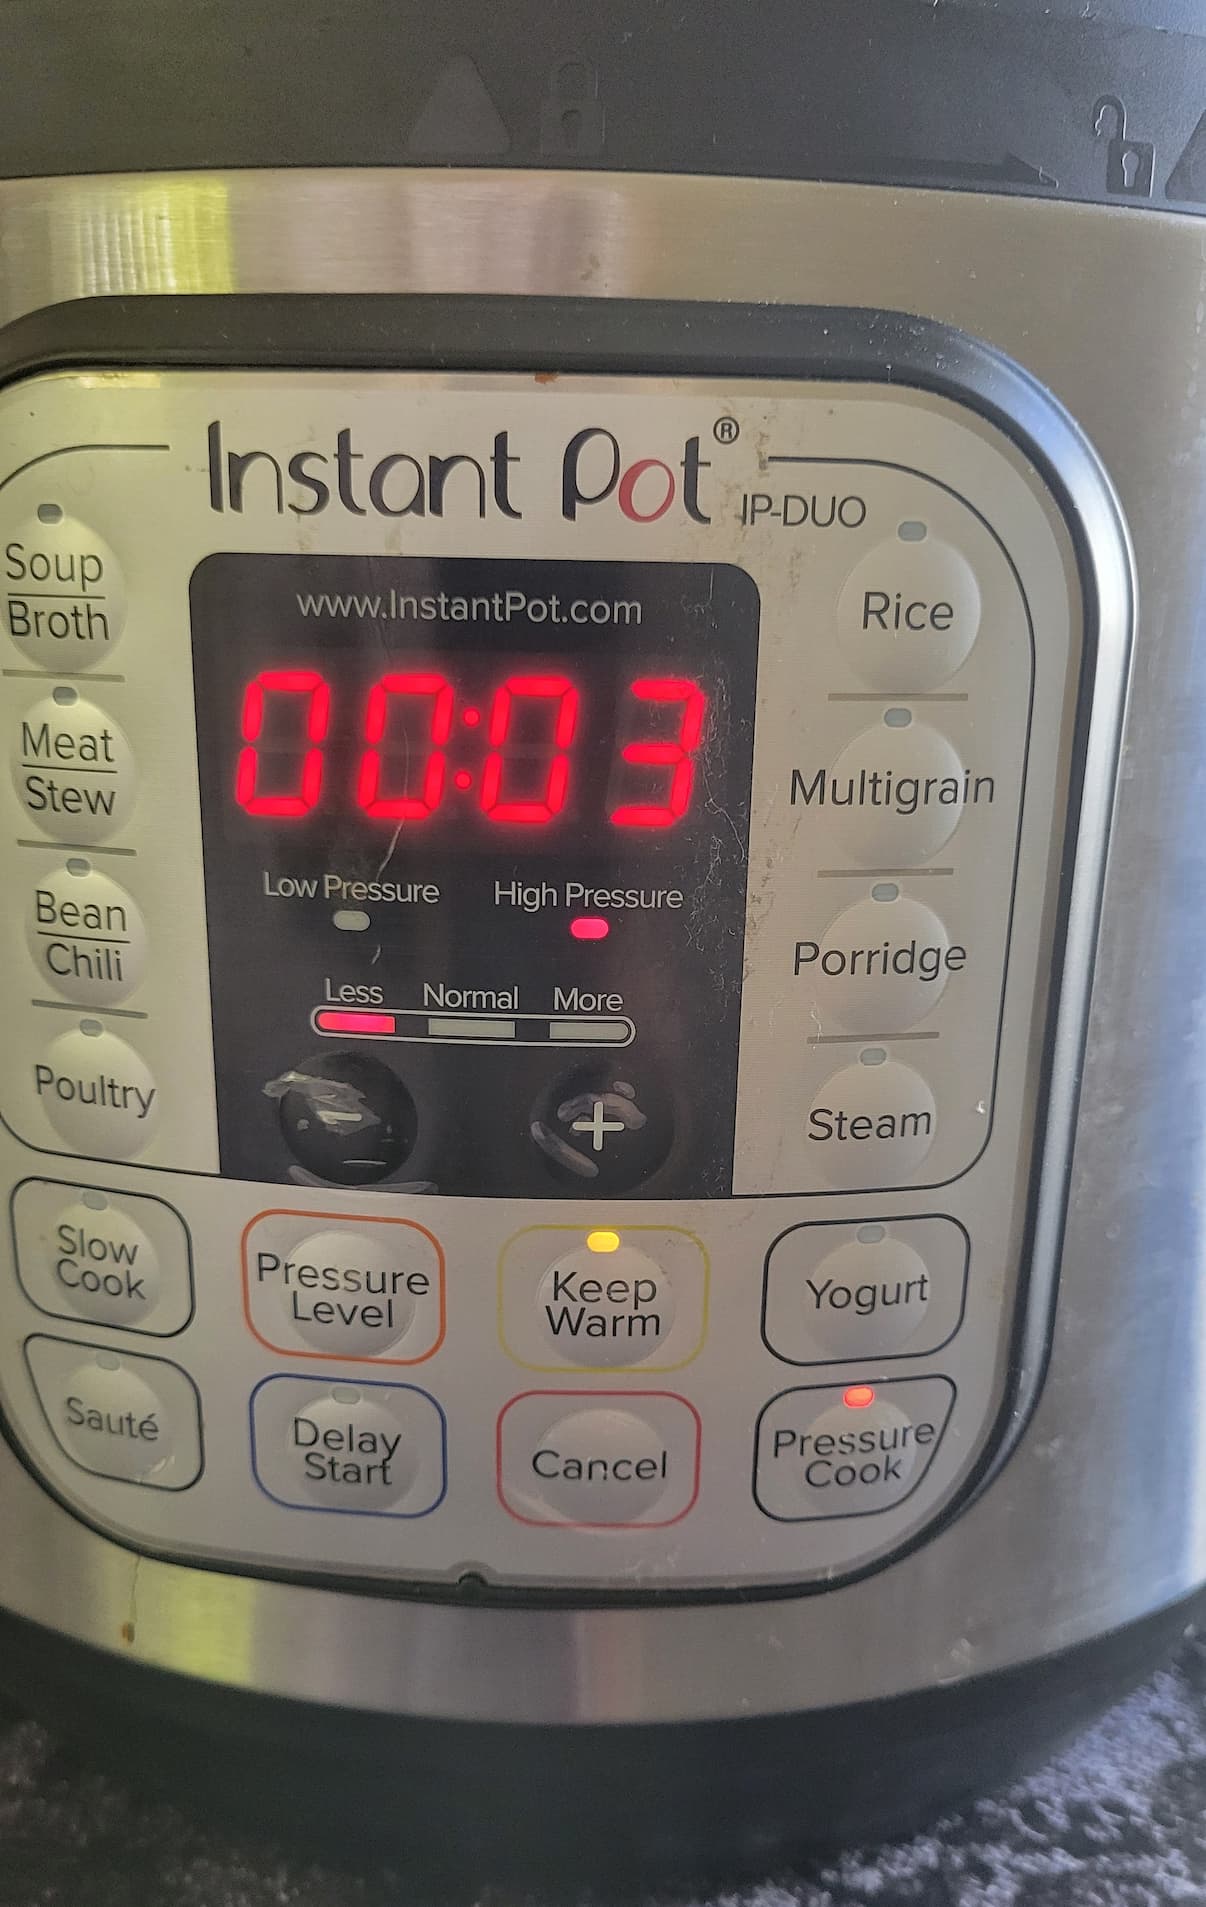 instant pot displaying 00:03